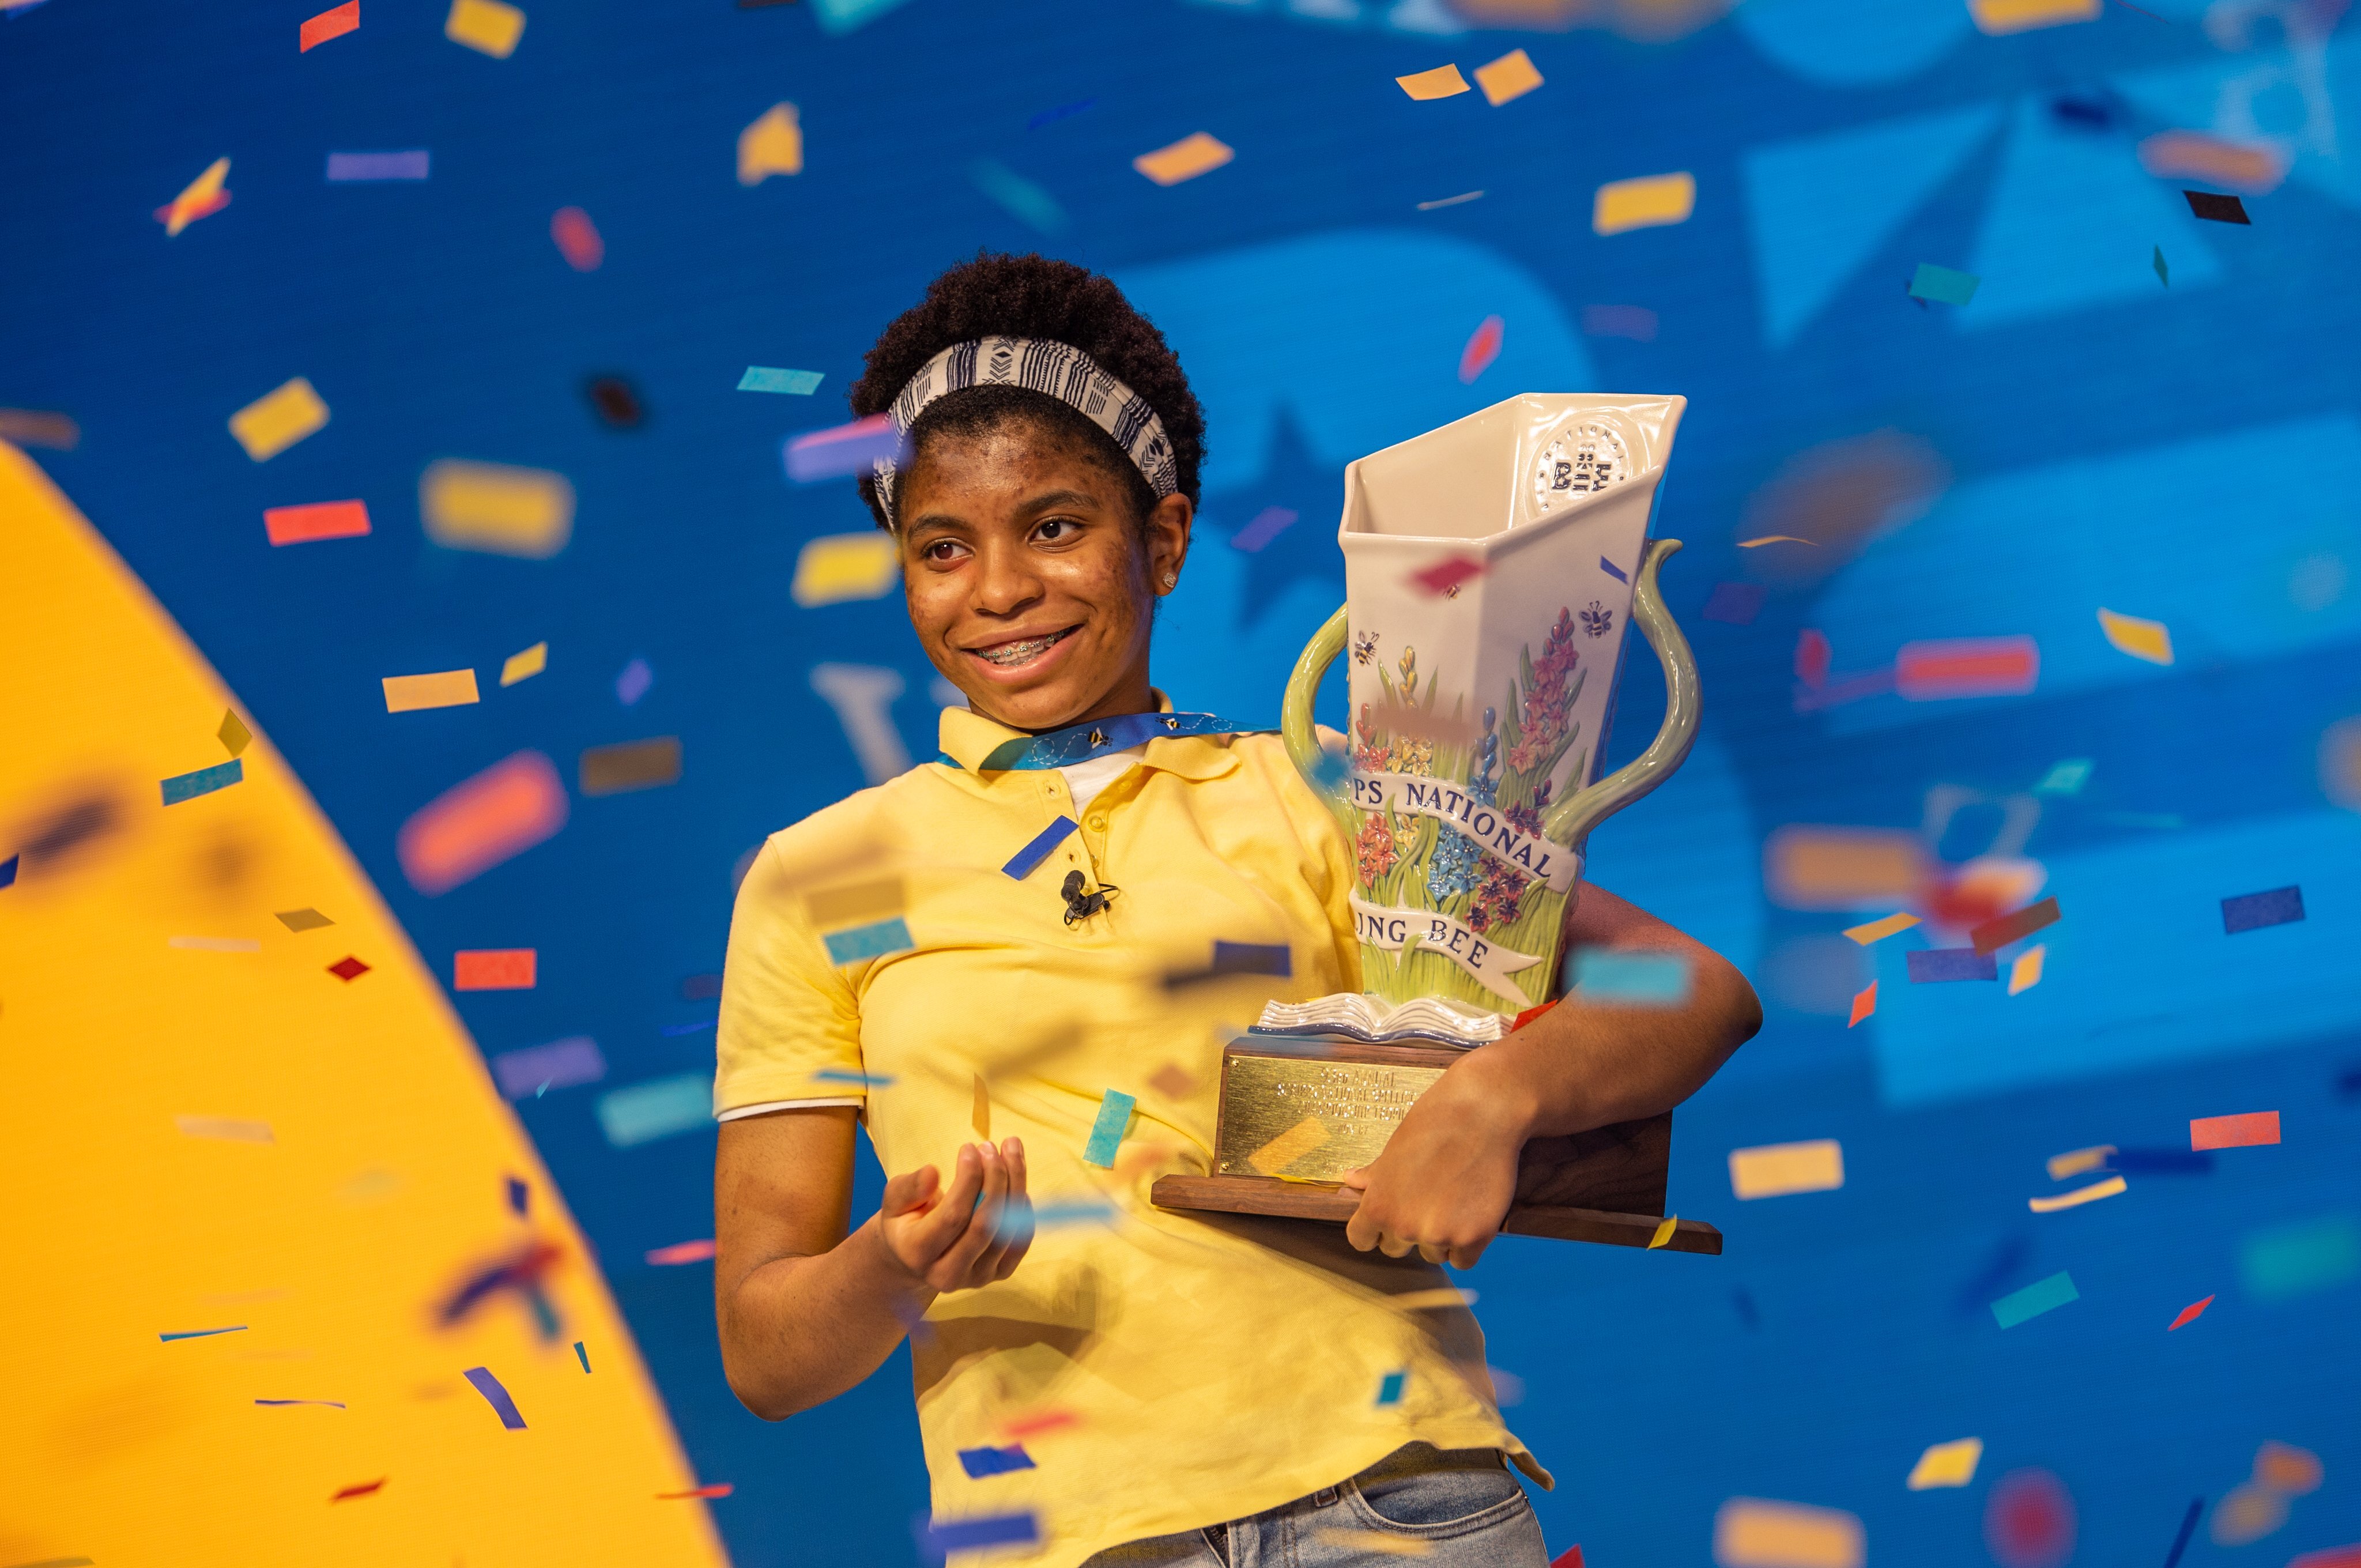 Basketball prodigy Zaila Avant-garde becomes first African-American to win 2021 Spell Bee